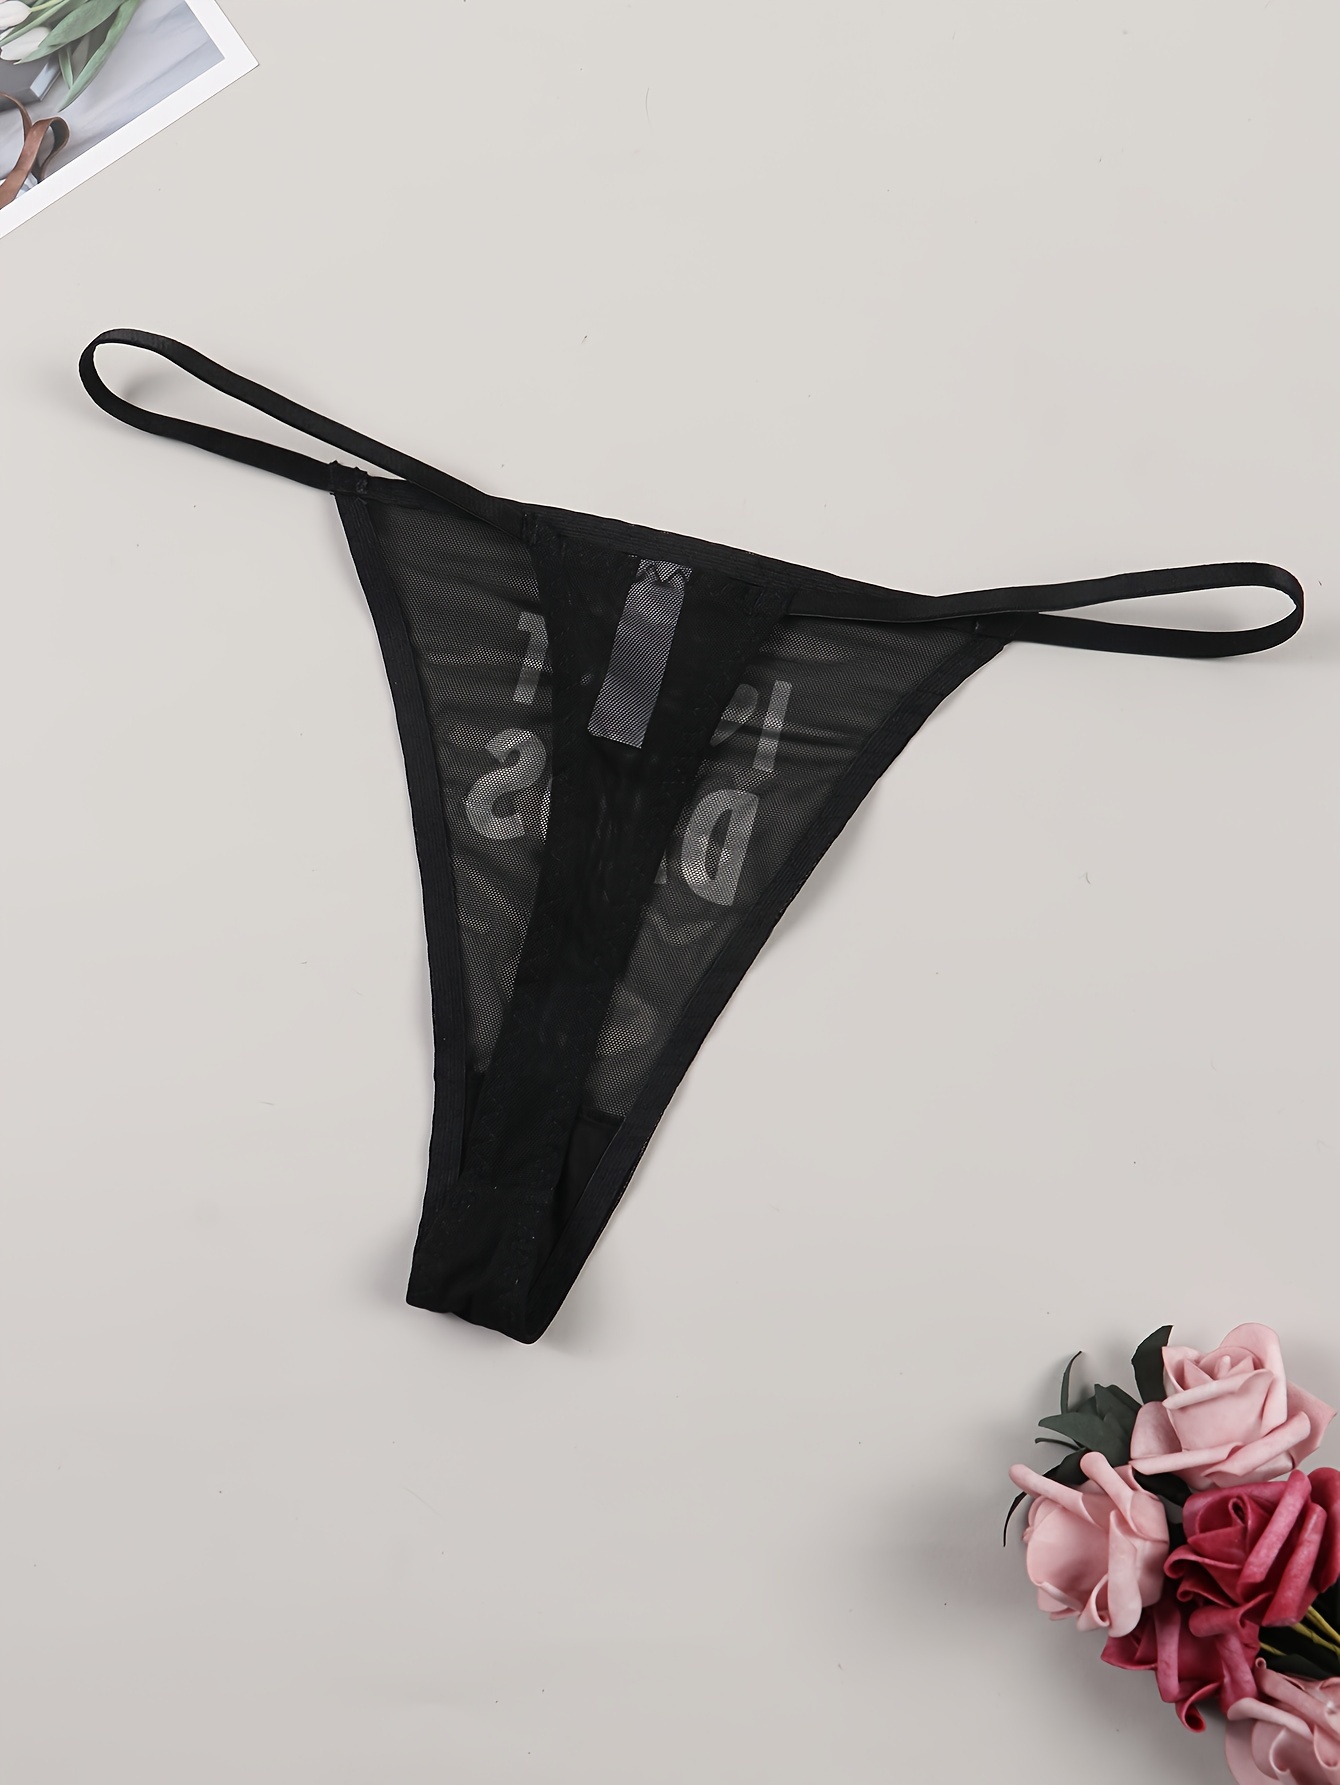 Letter Print Mesh Thongs, Breathable & Comfy Stretchy Intimates Panties,  Women's Lingerie & Underwear